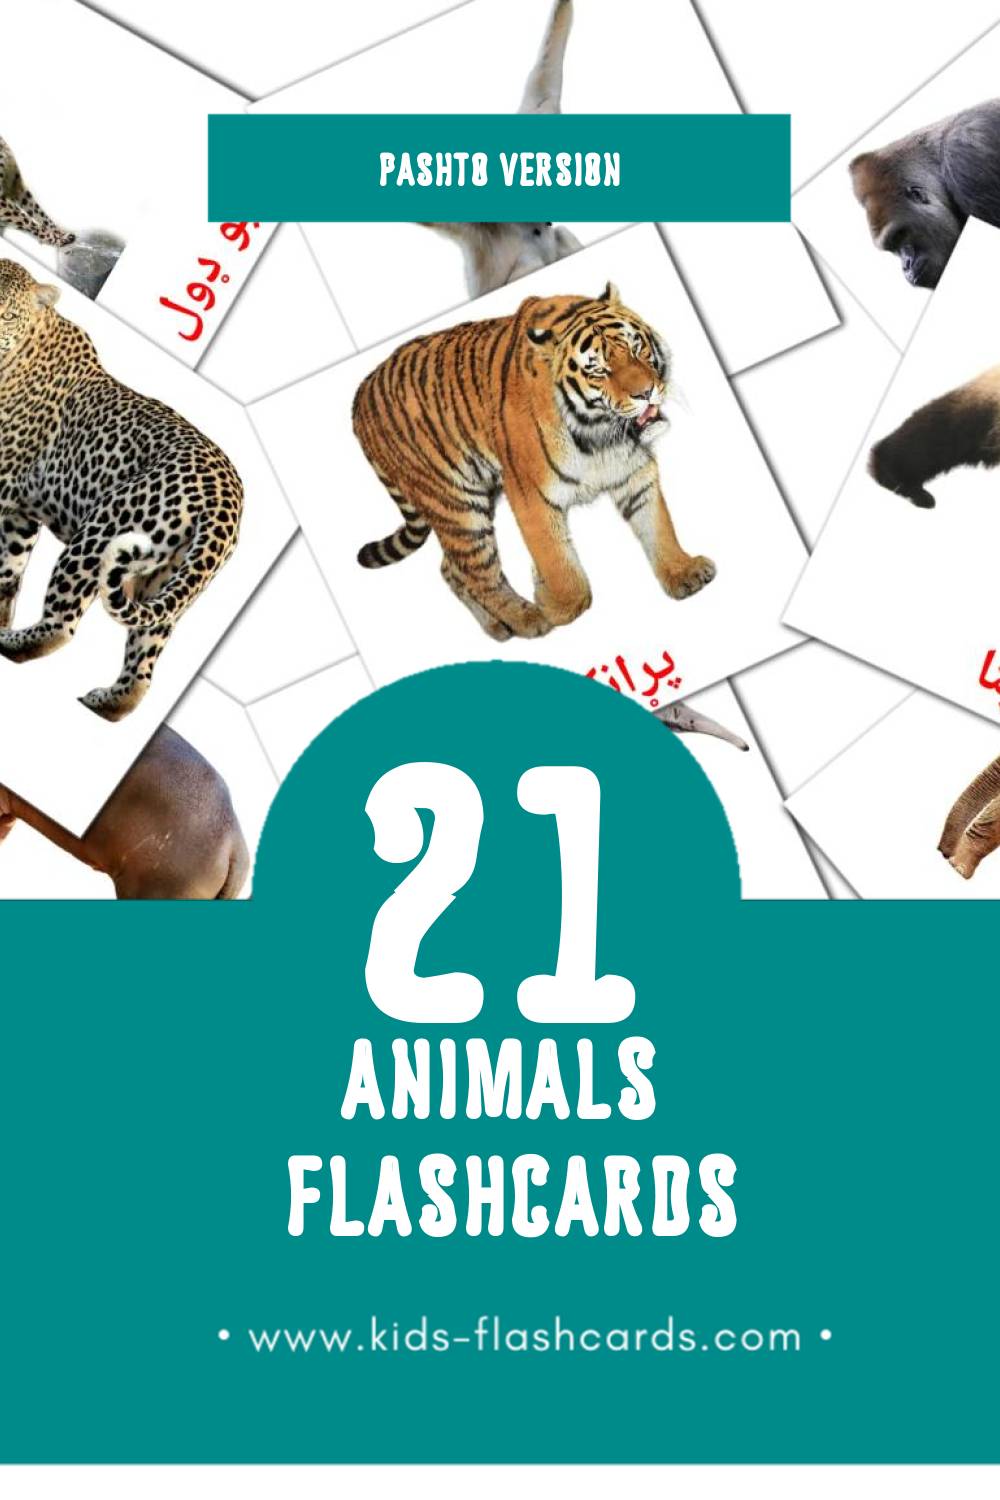 Visual ځناور Flashcards for Toddlers (36 cards in Pashto)